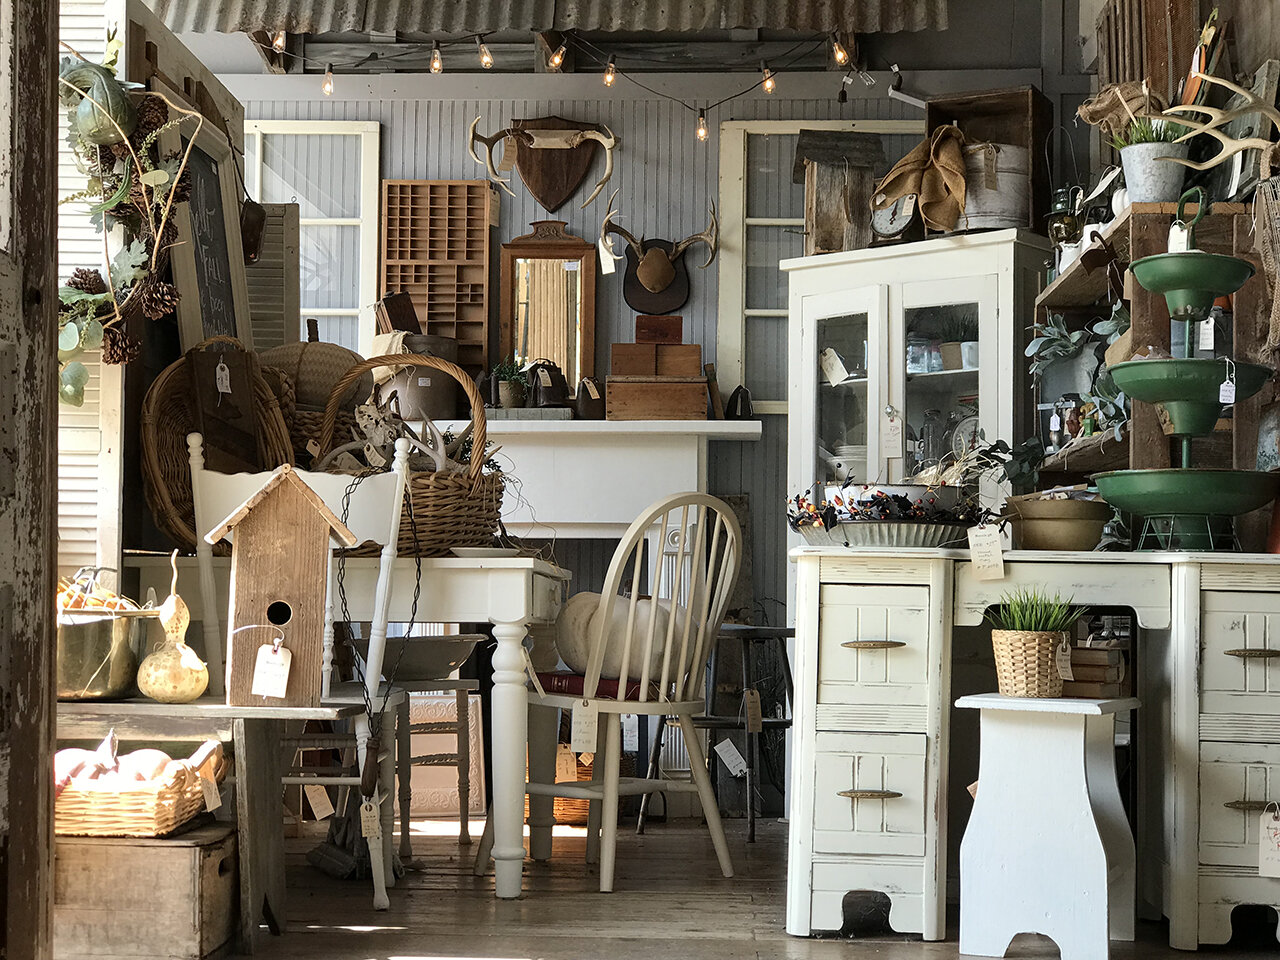 How to rent space at an antique mall